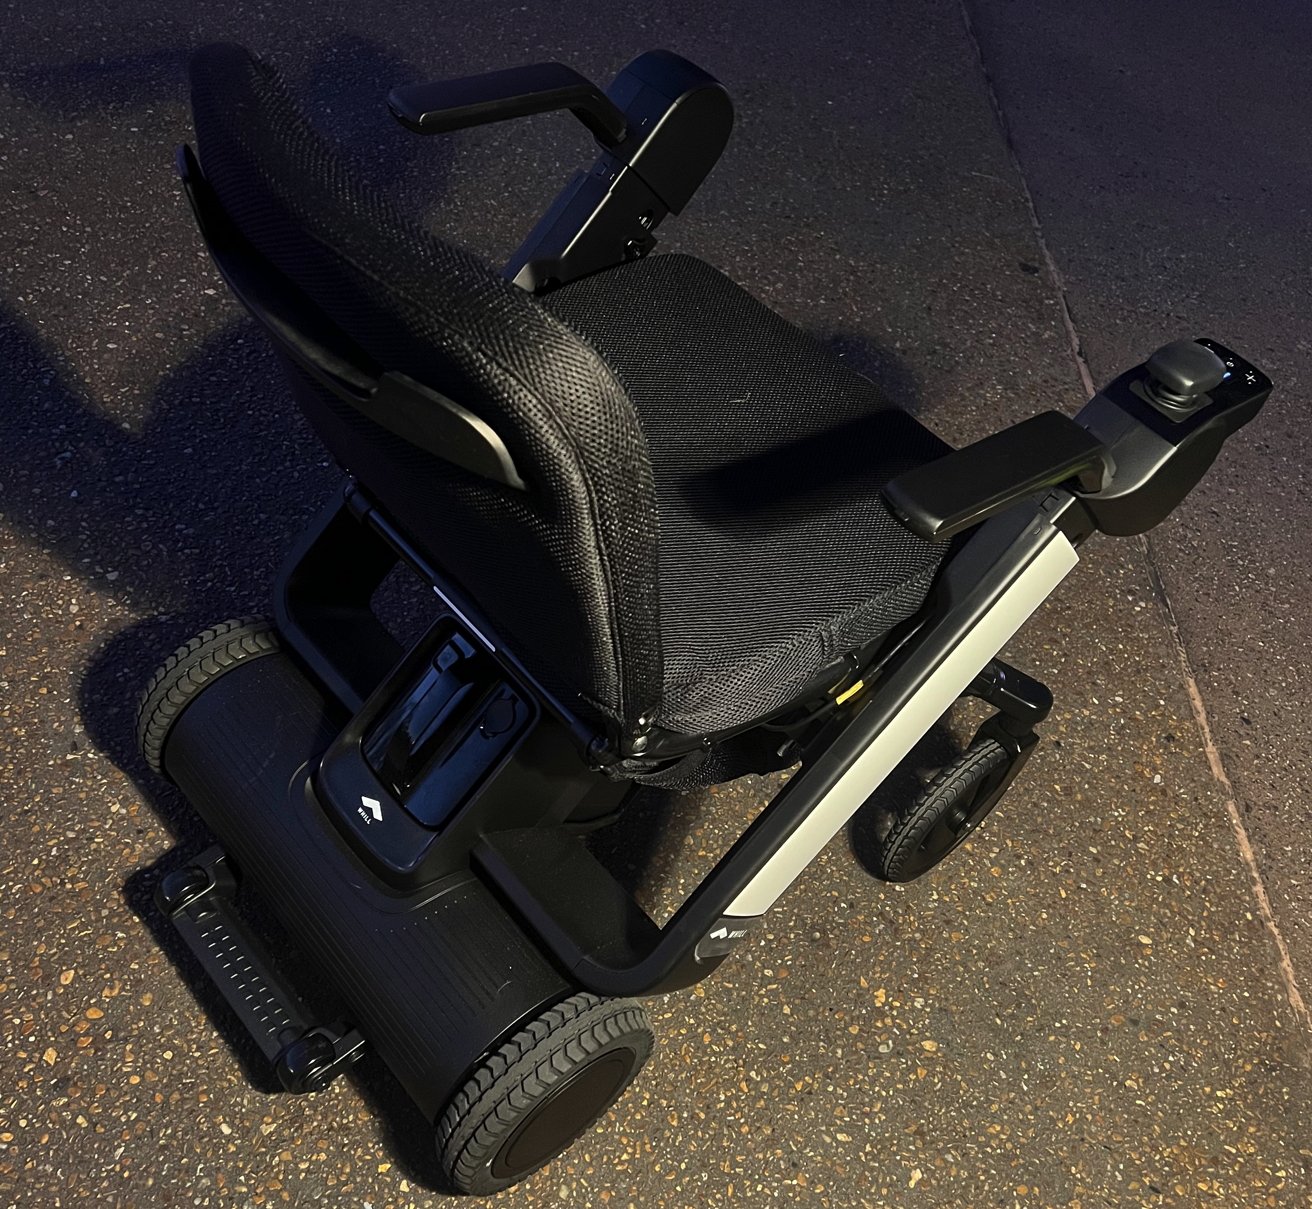 Whill Model F wheelchair, rear motor assembly and battery compartment, with right-mounted control stick